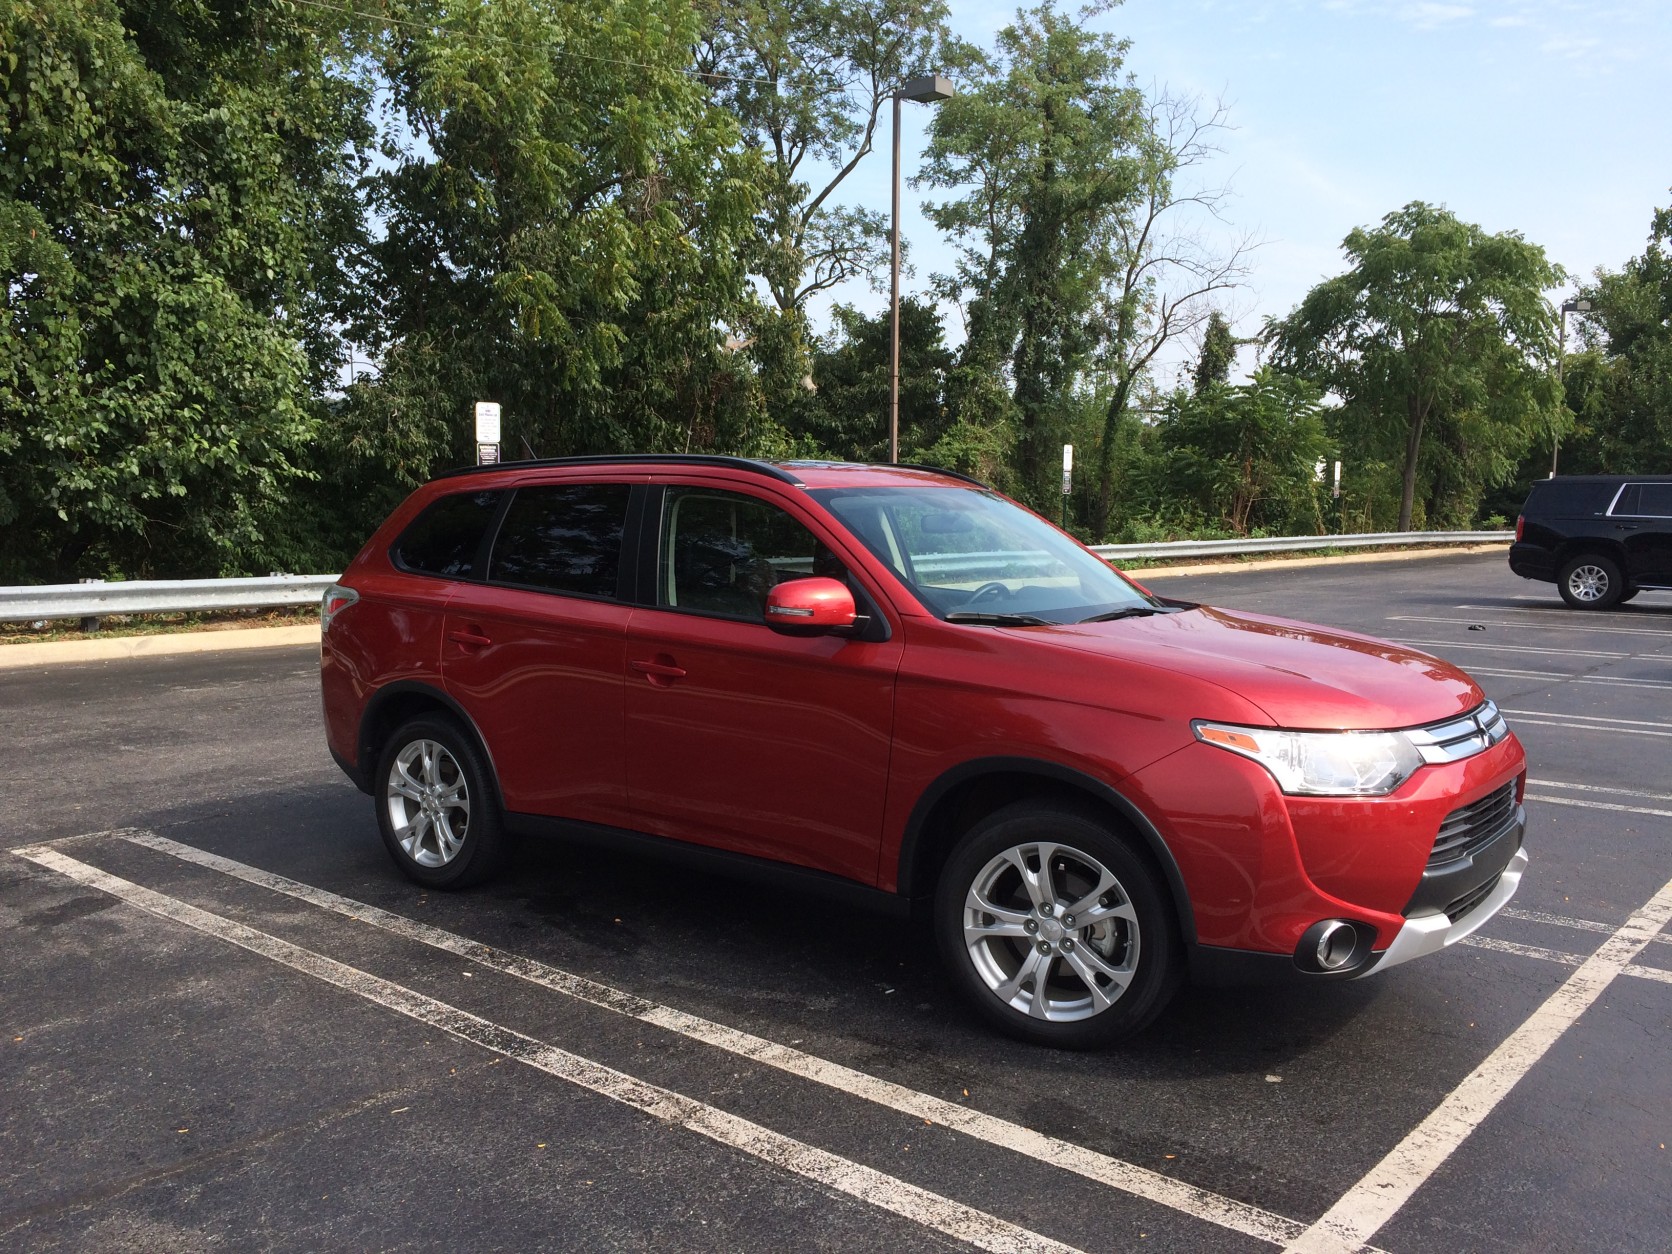  The 2015 Outlander is relatively inexpensive with just enough space for seven people, although children would be better served sitting in the third row of this quaint crossover. Look out for a redesign next year. (WTOP/Mike Parris)